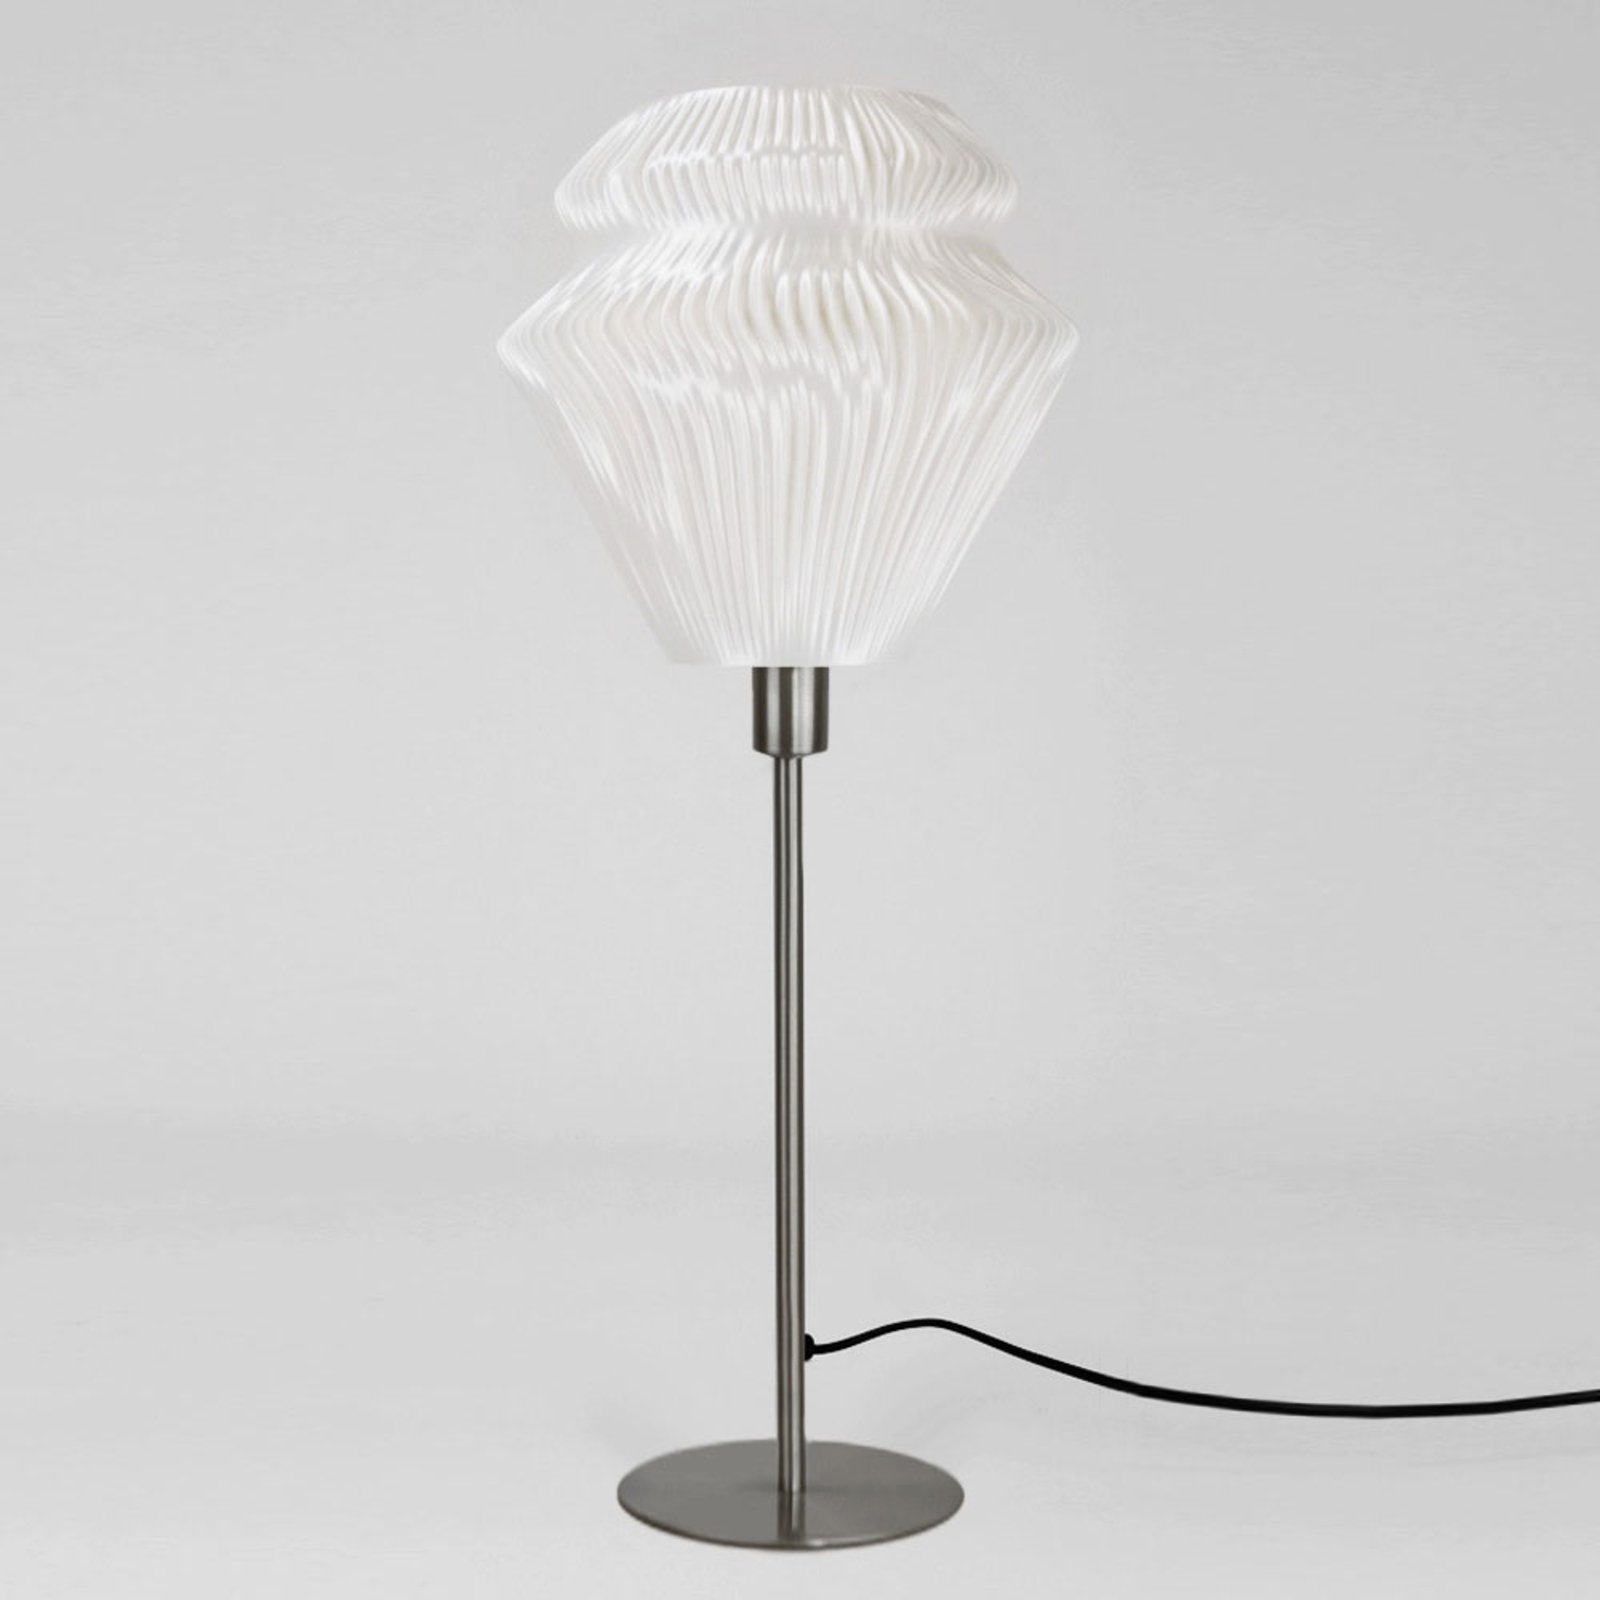 Lamell table lamp made of biomaterial, Ø 25 cm